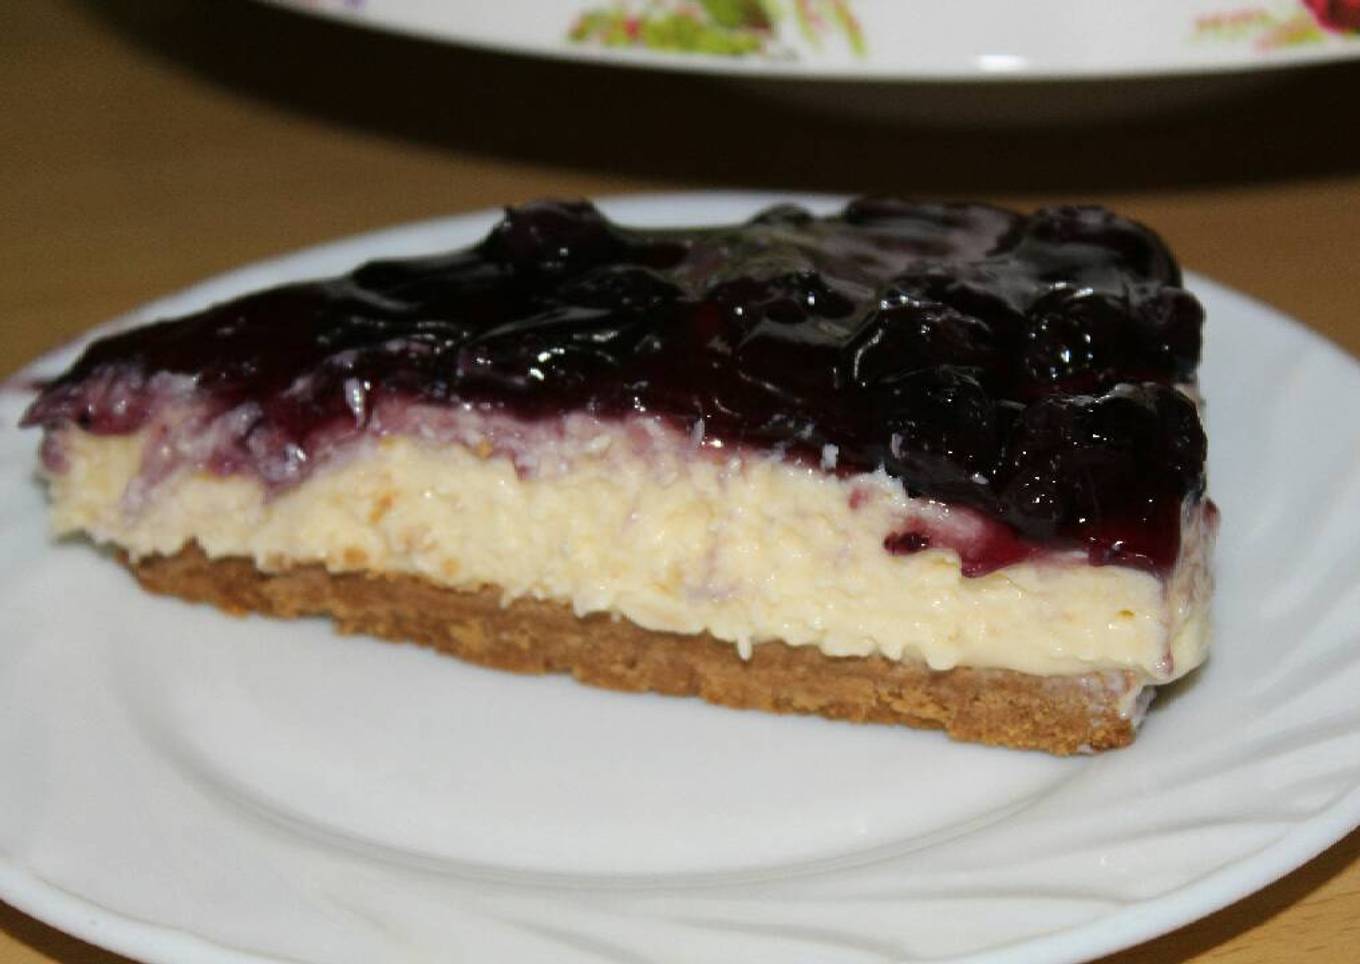 Do not overcook the blueberry cheesecake.